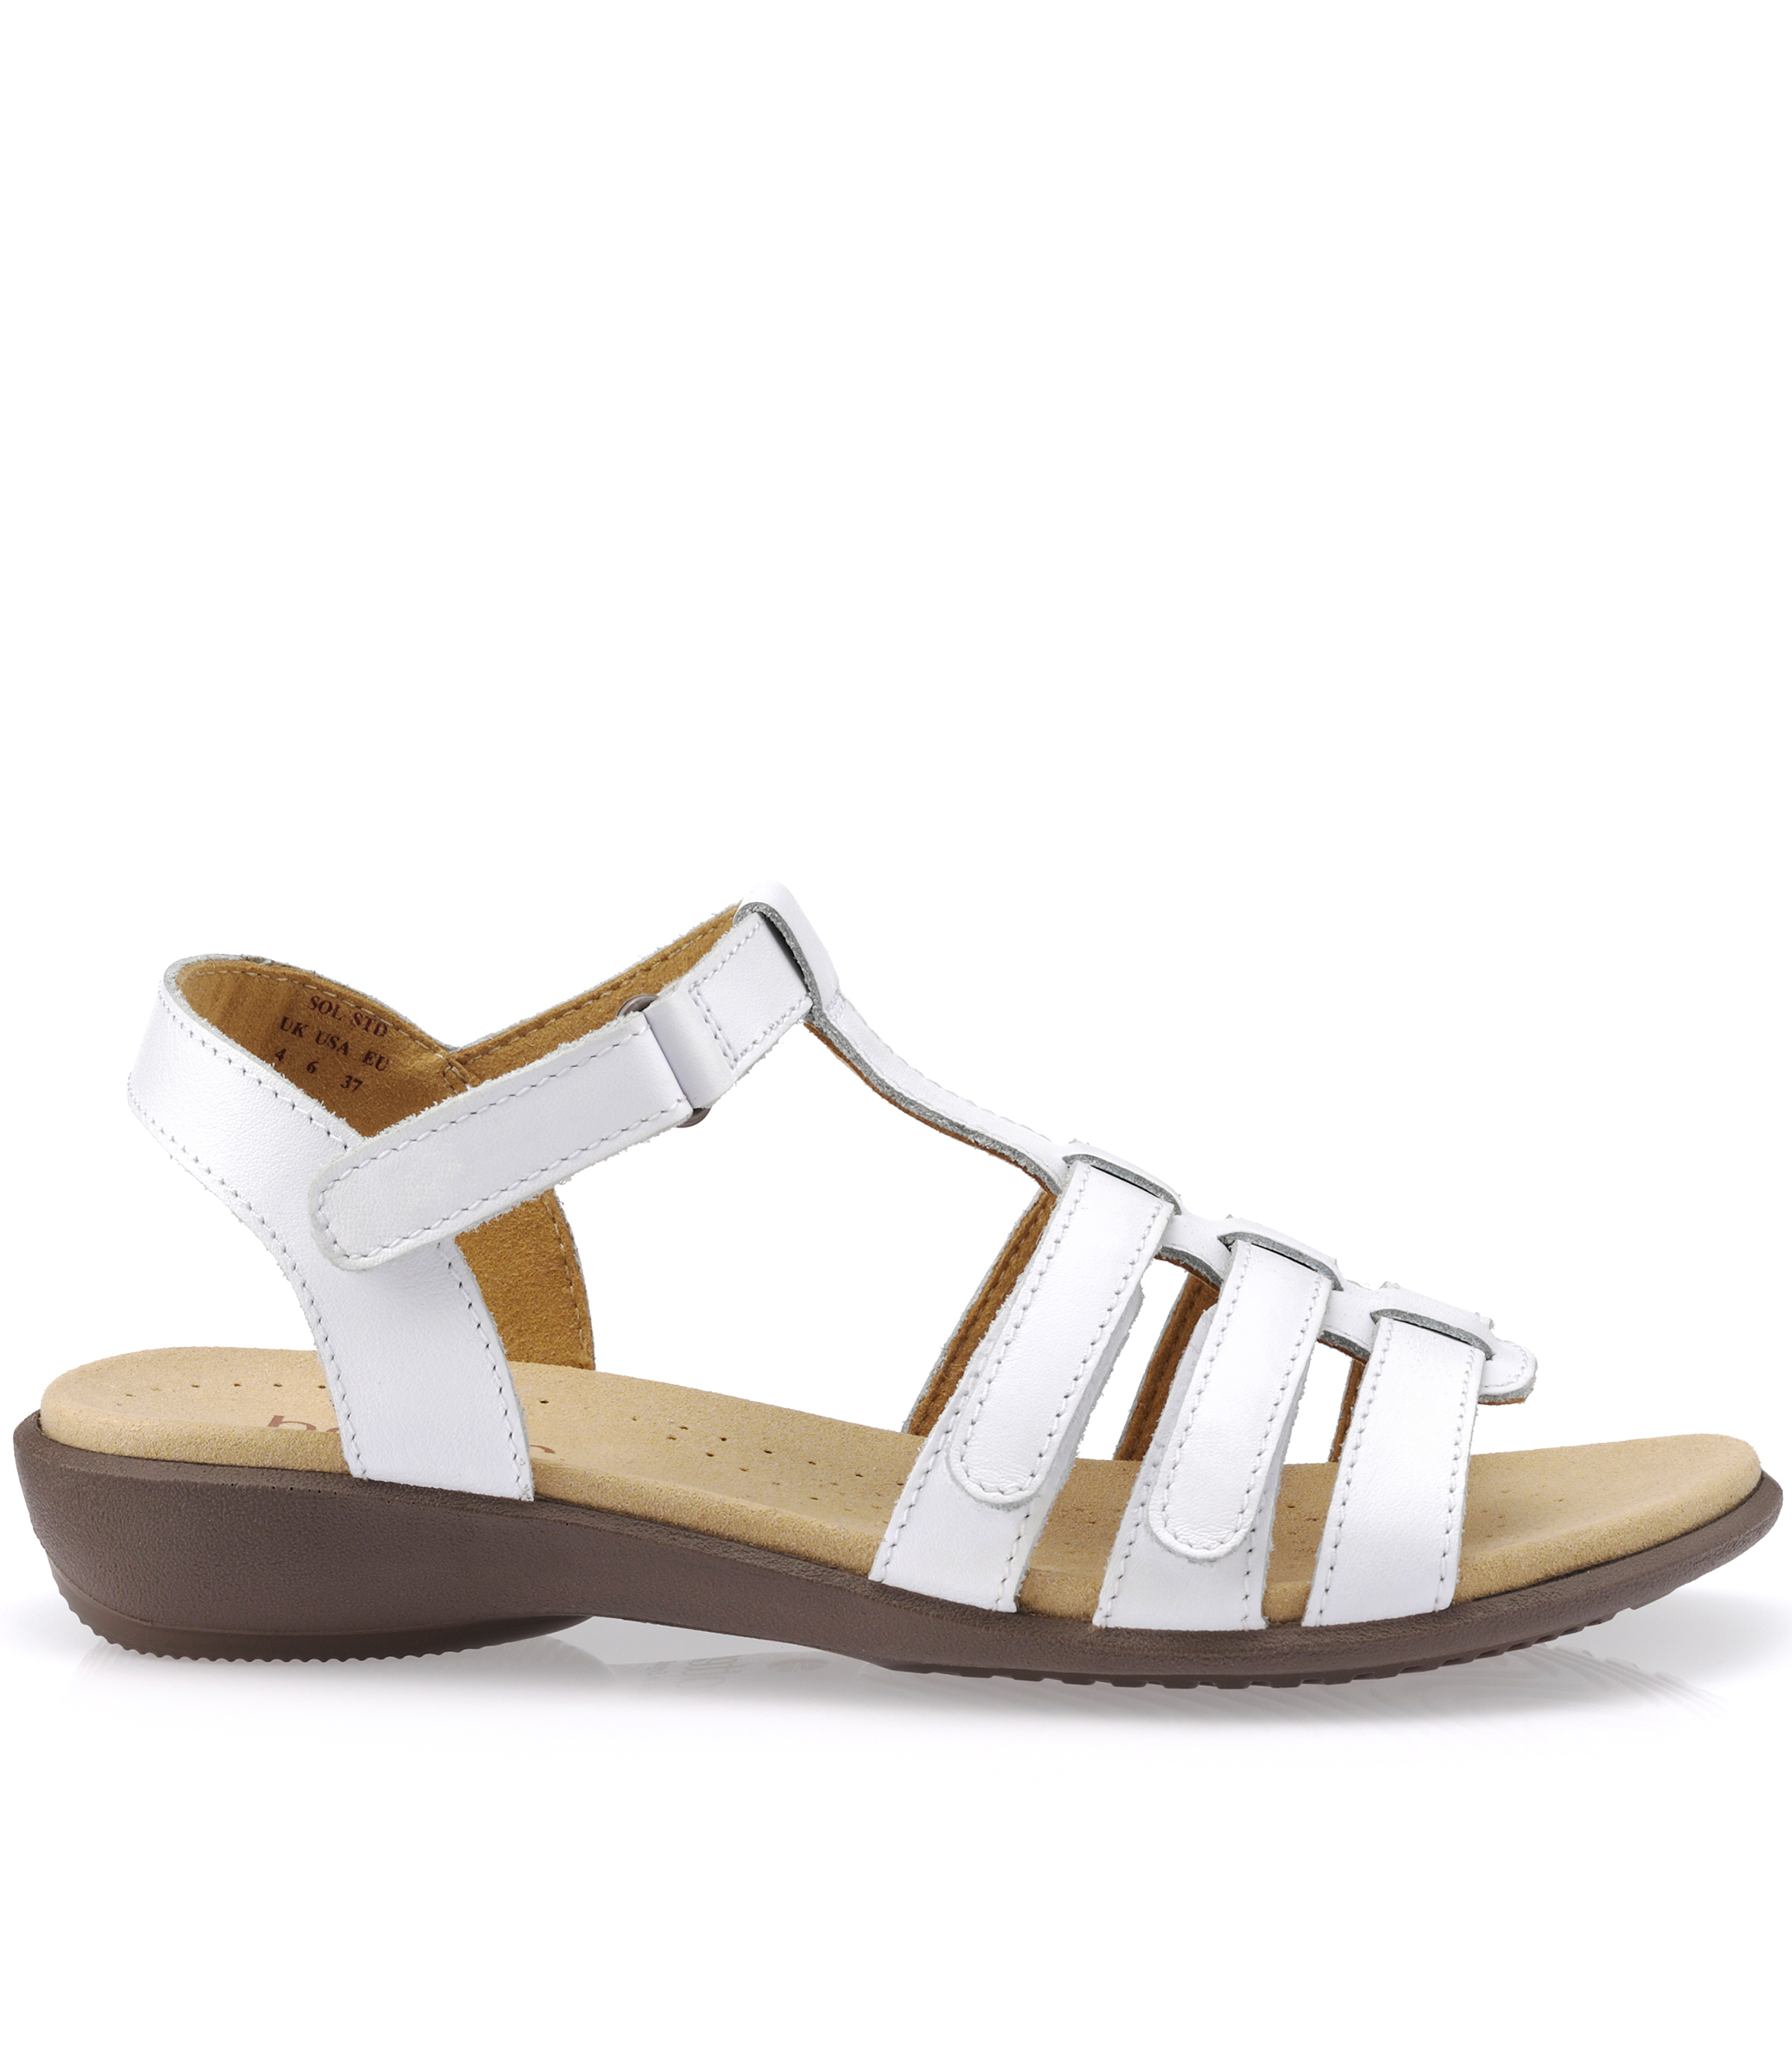 HOTTER WHITE LEATHER SOL SANDAL | Rosella - Style inspired by elegance